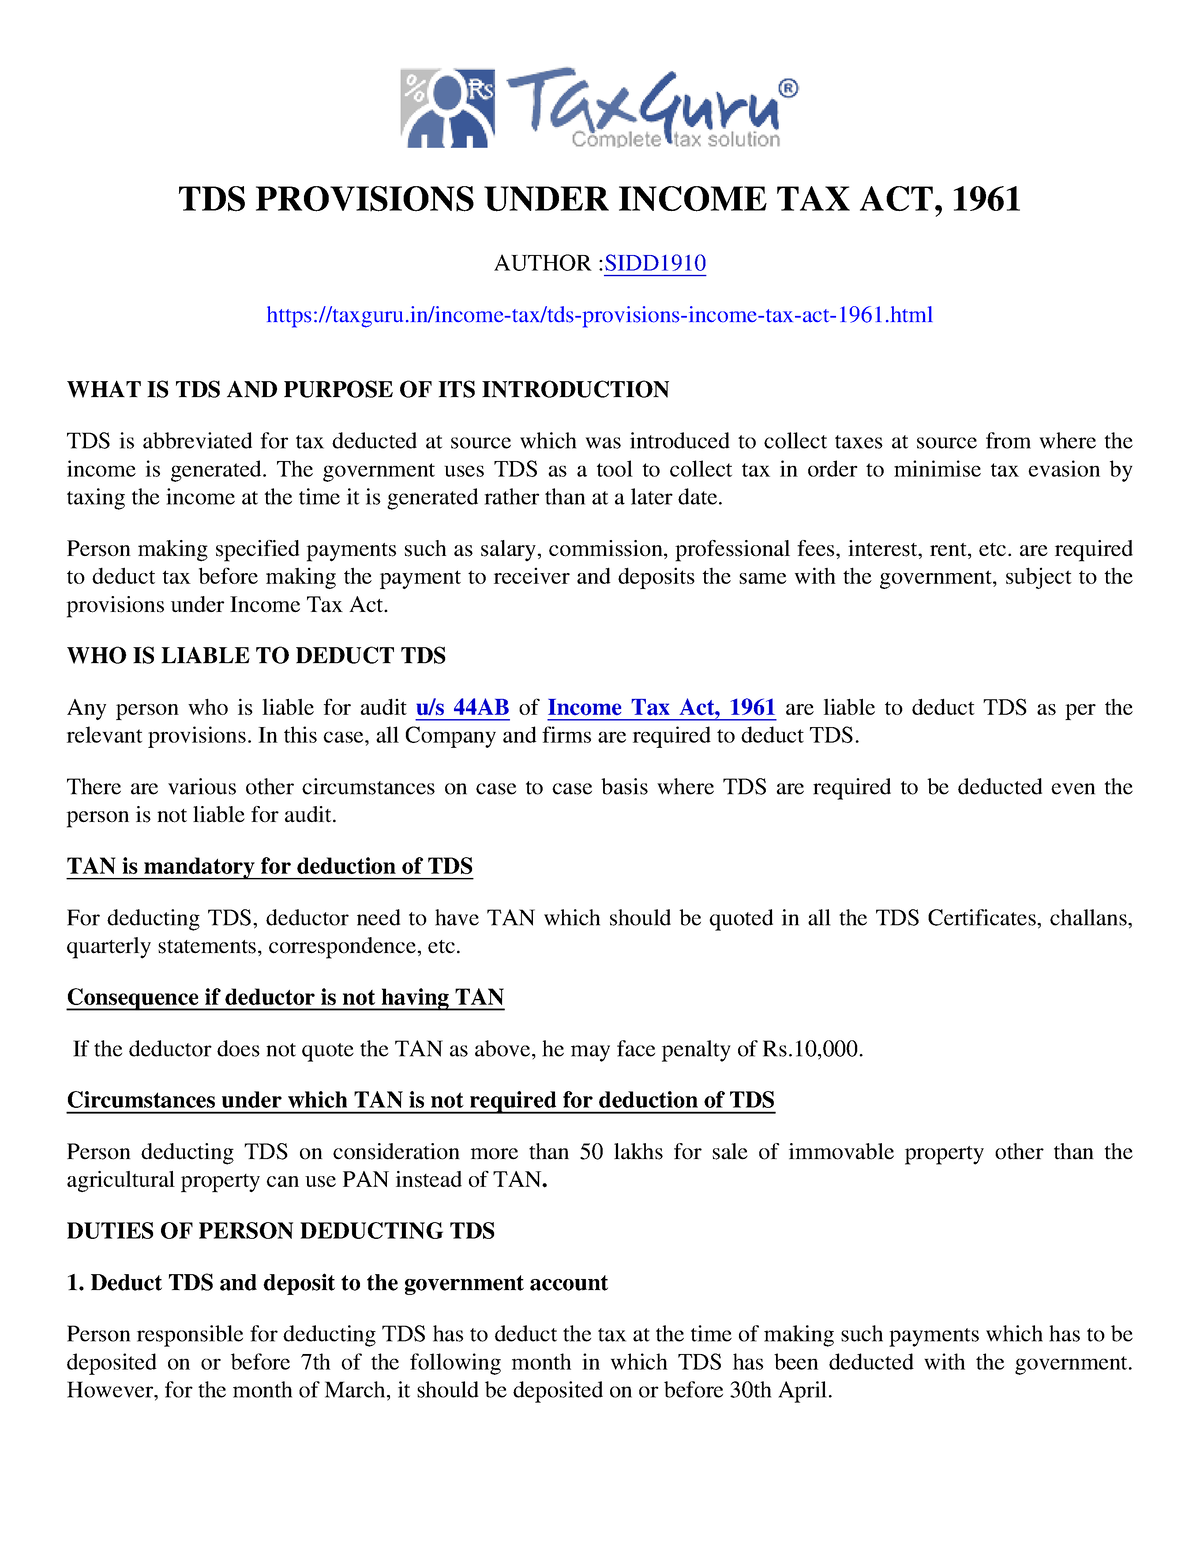 tds-provisions-under-income-tax-act-1961-taxguru-in-tds-provisions